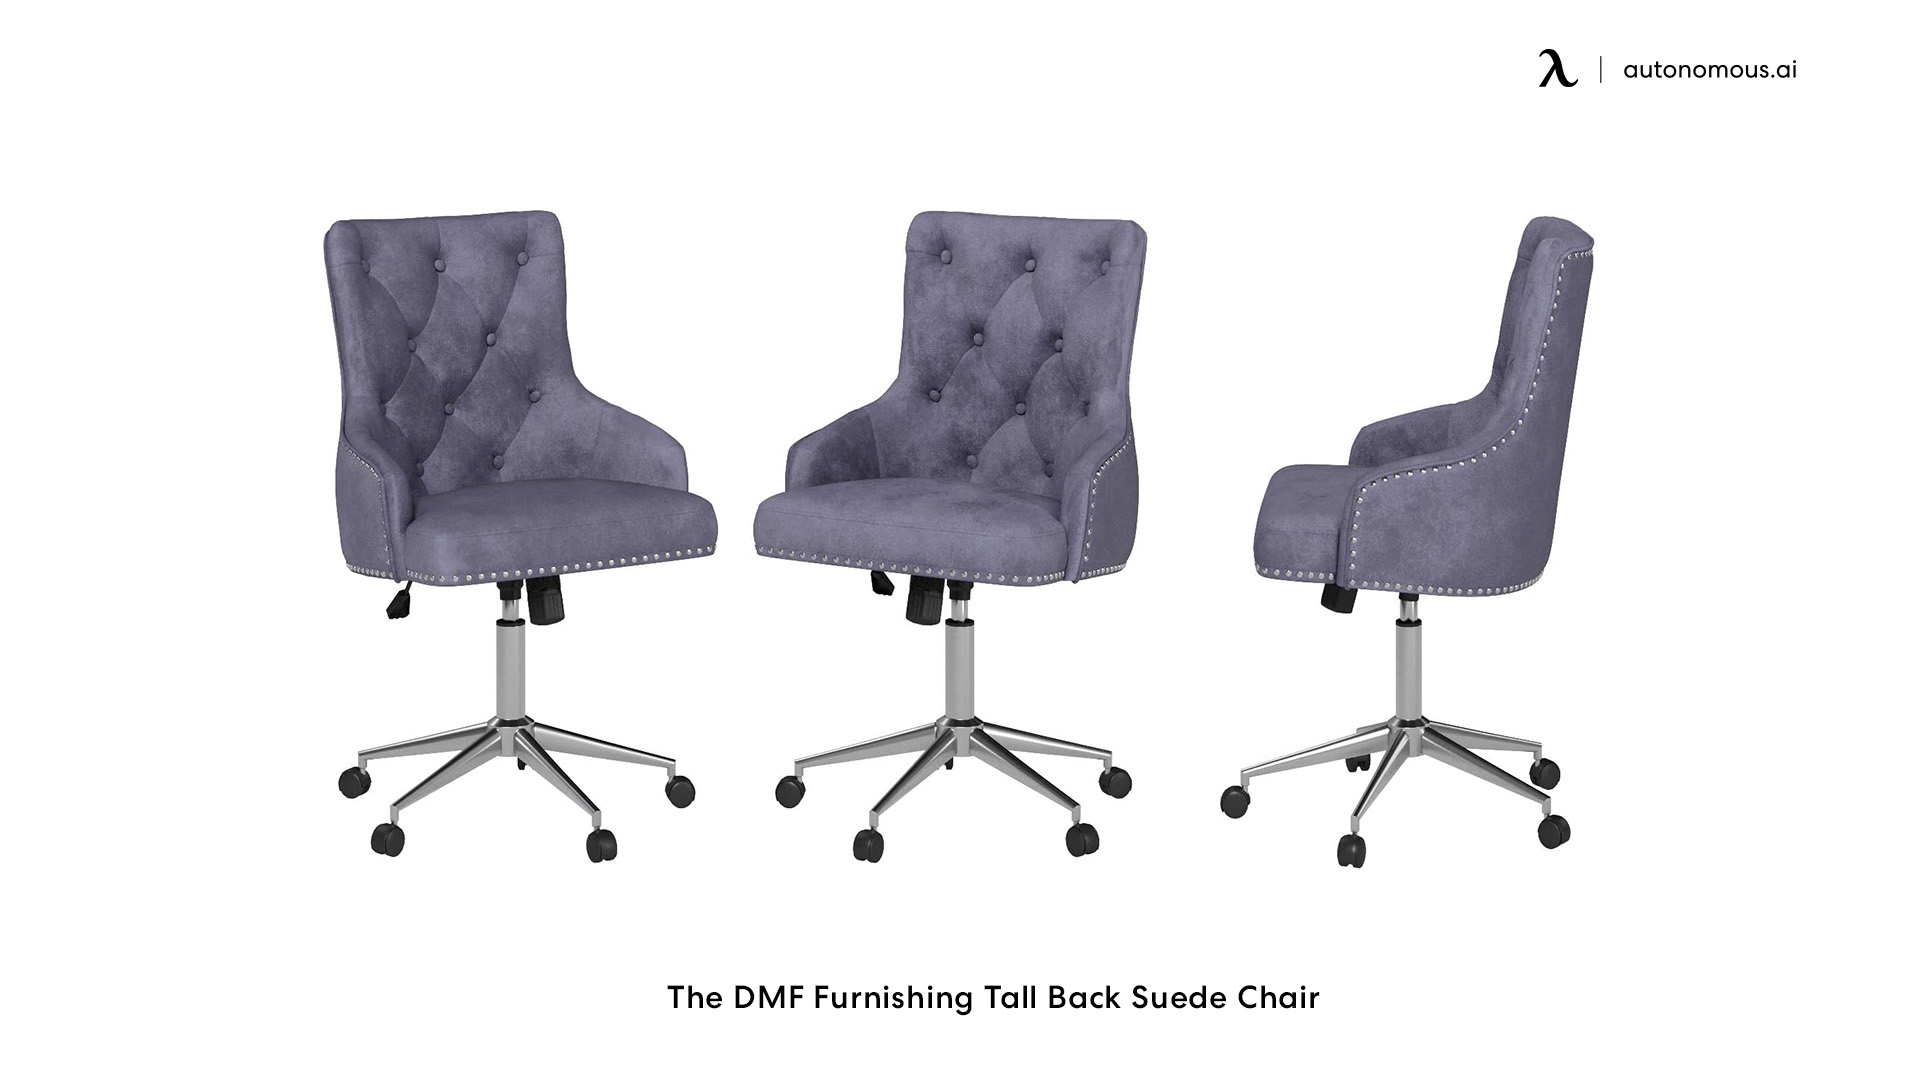 The DMF fabric swivel office chair